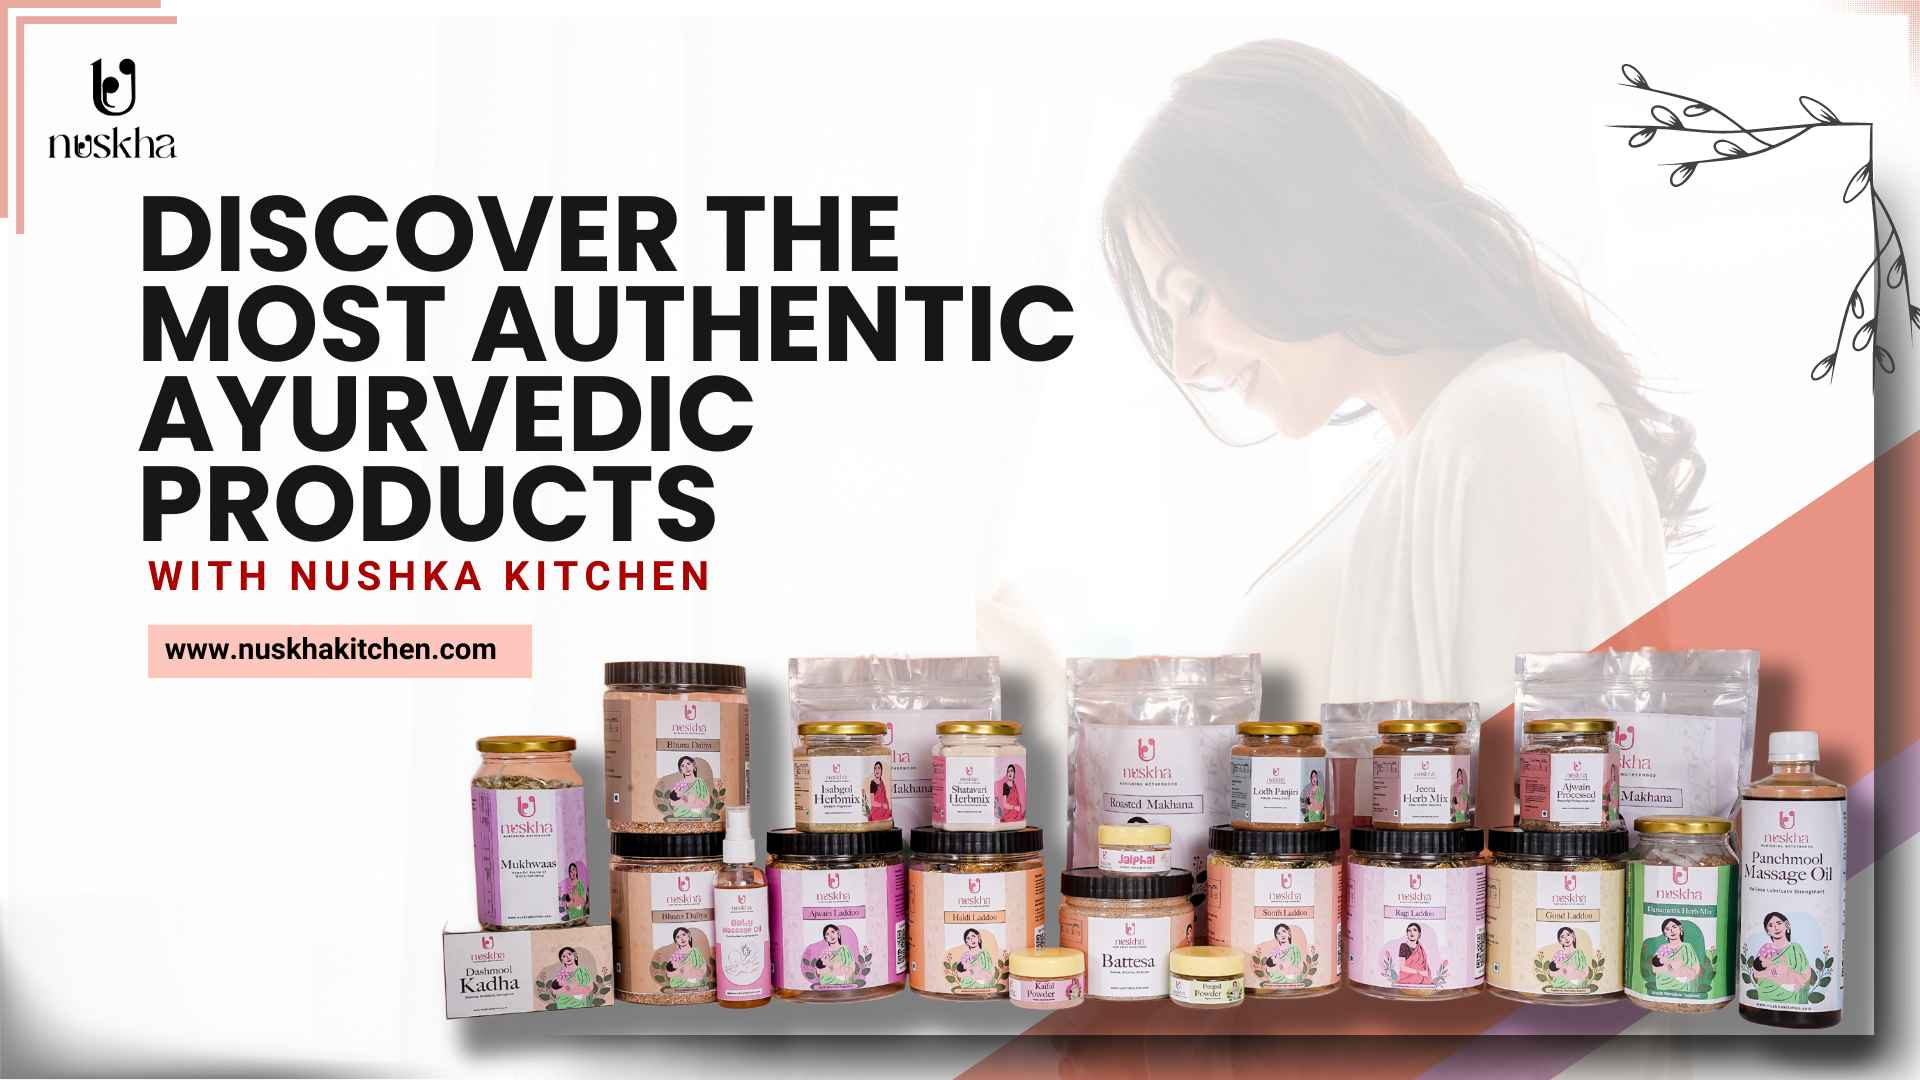 Discover the most authentic Ayurvedic products with Nushka Kitchen